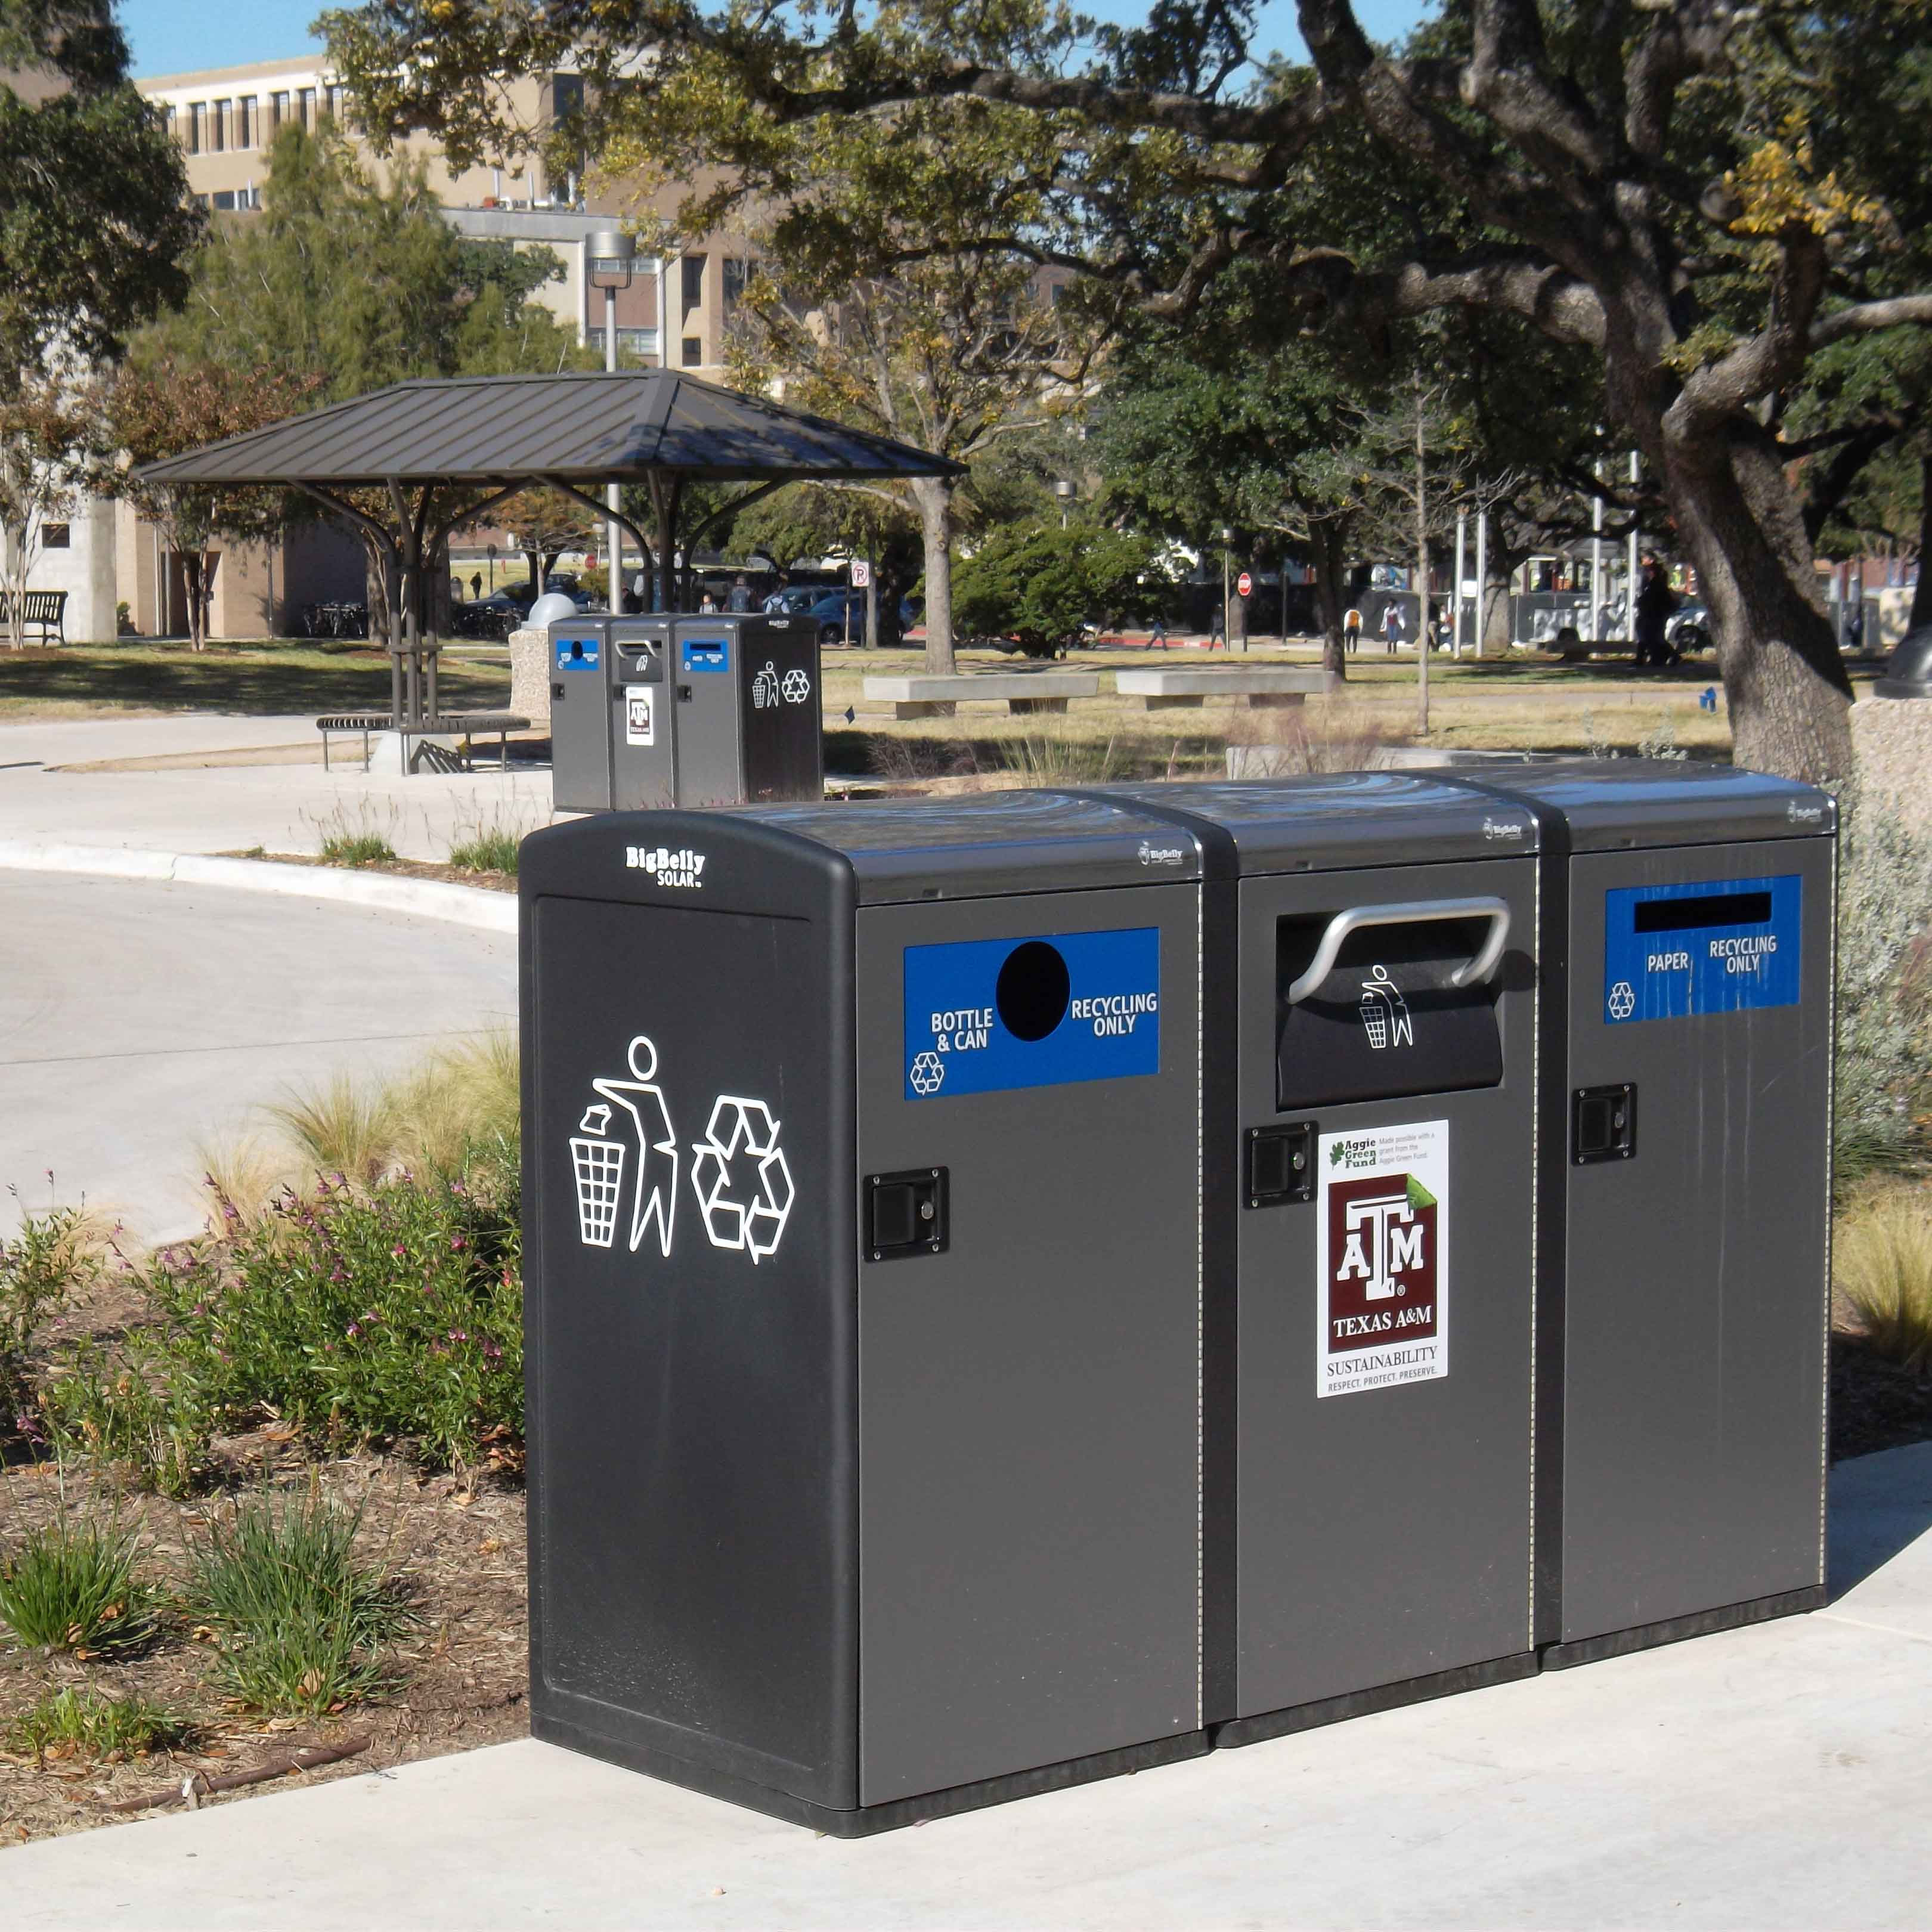 Set of three exterior recycling bins on campus